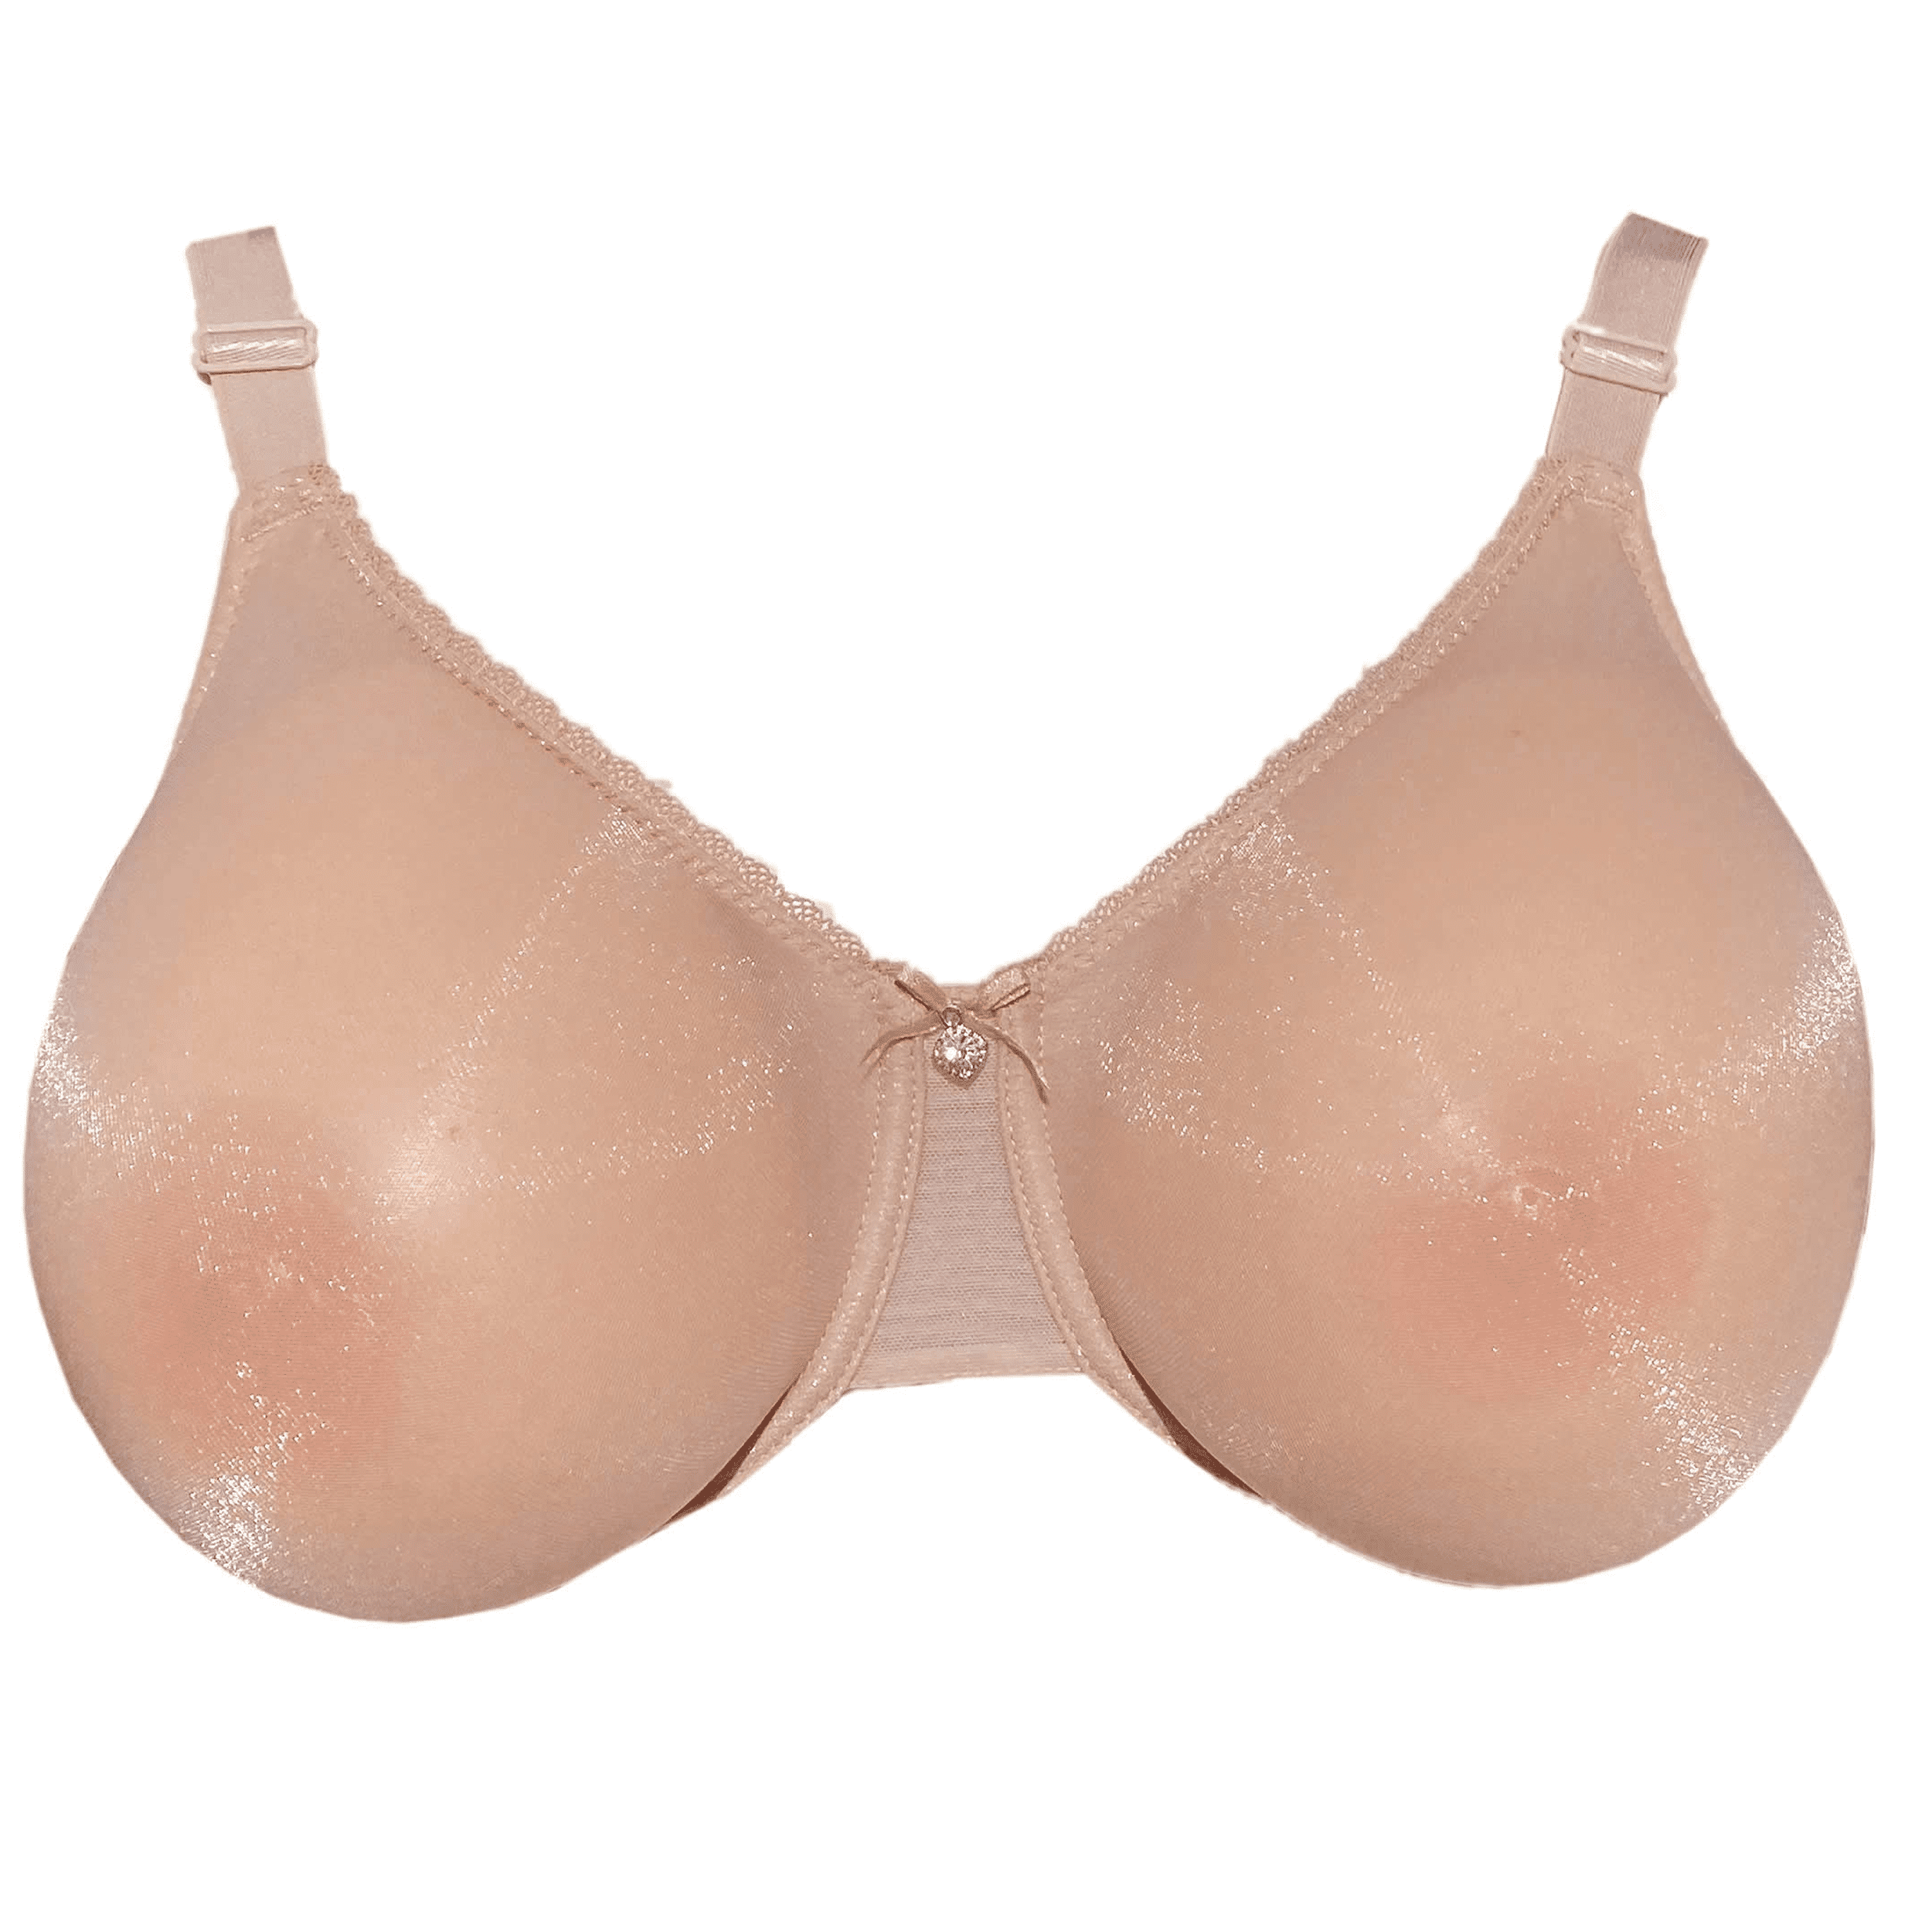 BIMEI See Through Bra CD Mastectomy Lingerie Bra Silicone Breast Forms  Prosthesis Pocket Bra with Steel Ring 9008,Beige,40C 